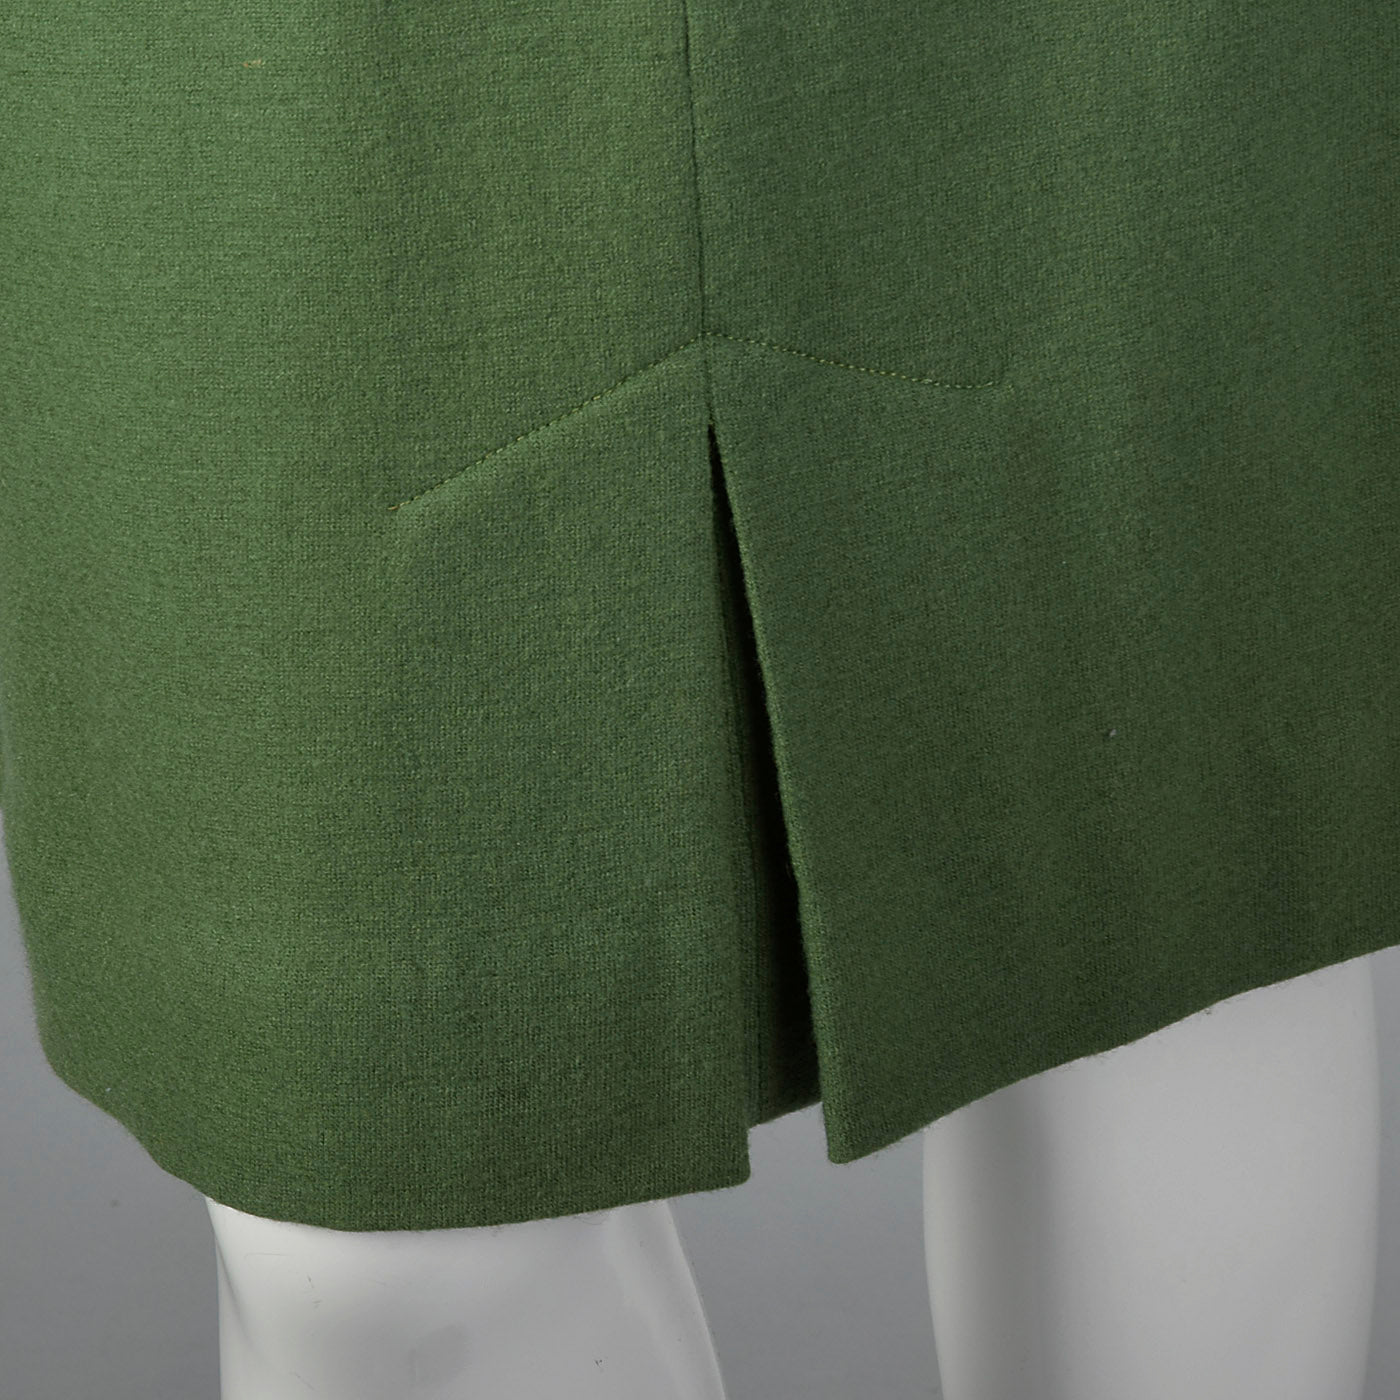 1960s Green Wool Pencil Dress with Button Front